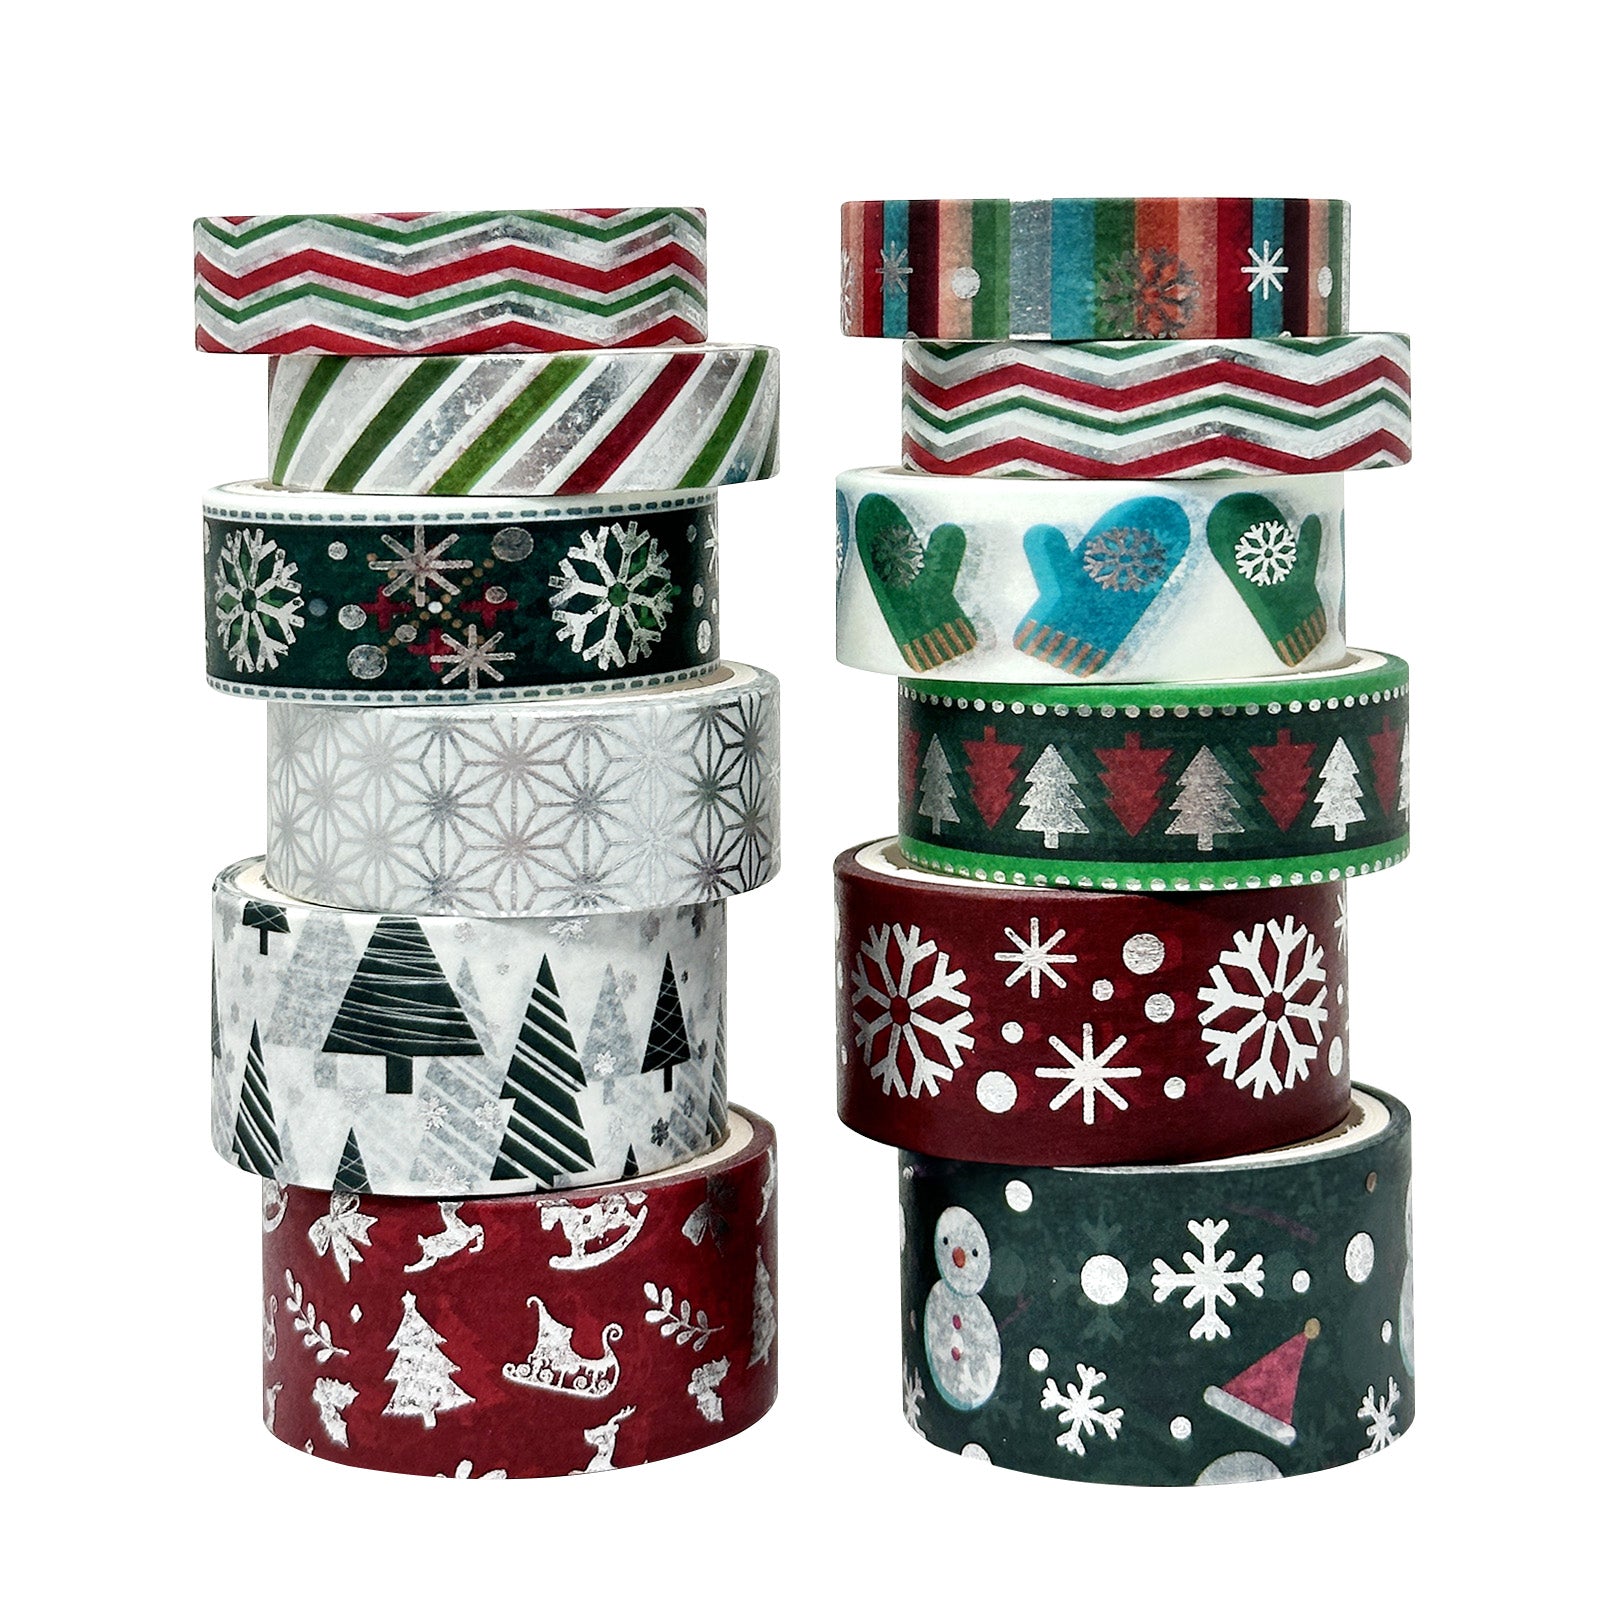 Wrapables Winter Season Washi Set for Arts & Crafts, Scrapbooking, Stationery, Diary 12pc Festive Cheer